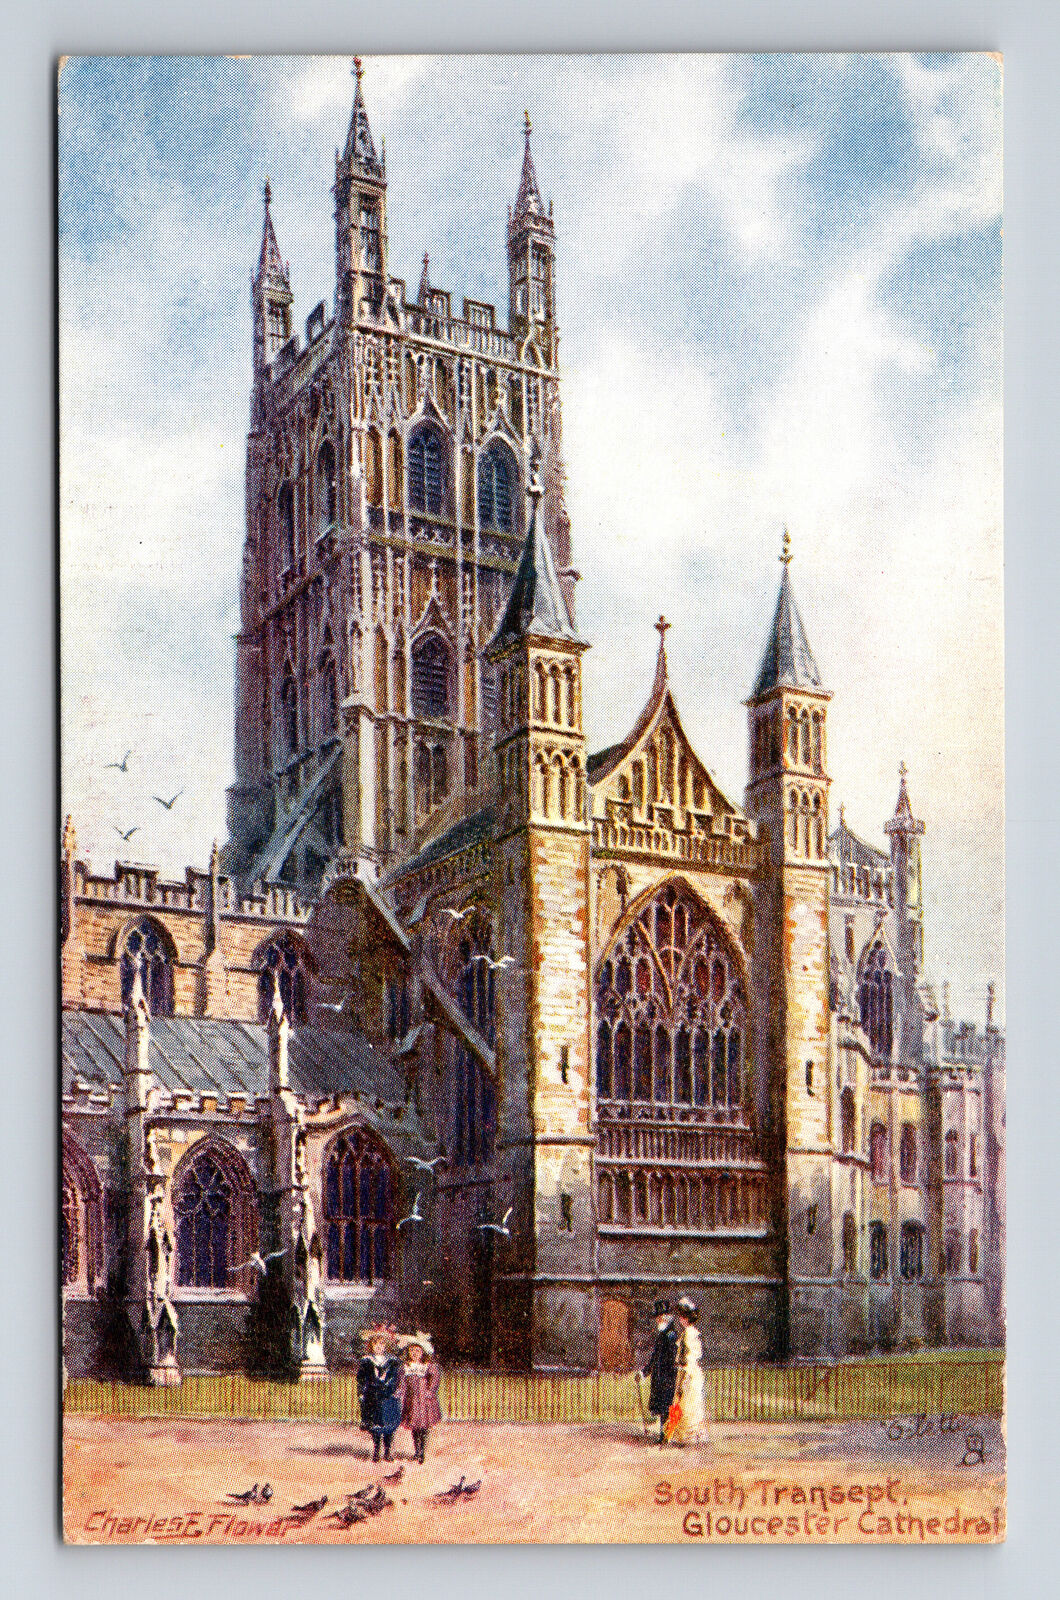 South Transept Gloucester Cathedral by Charles F Flower Tuck's Oilette Postcard